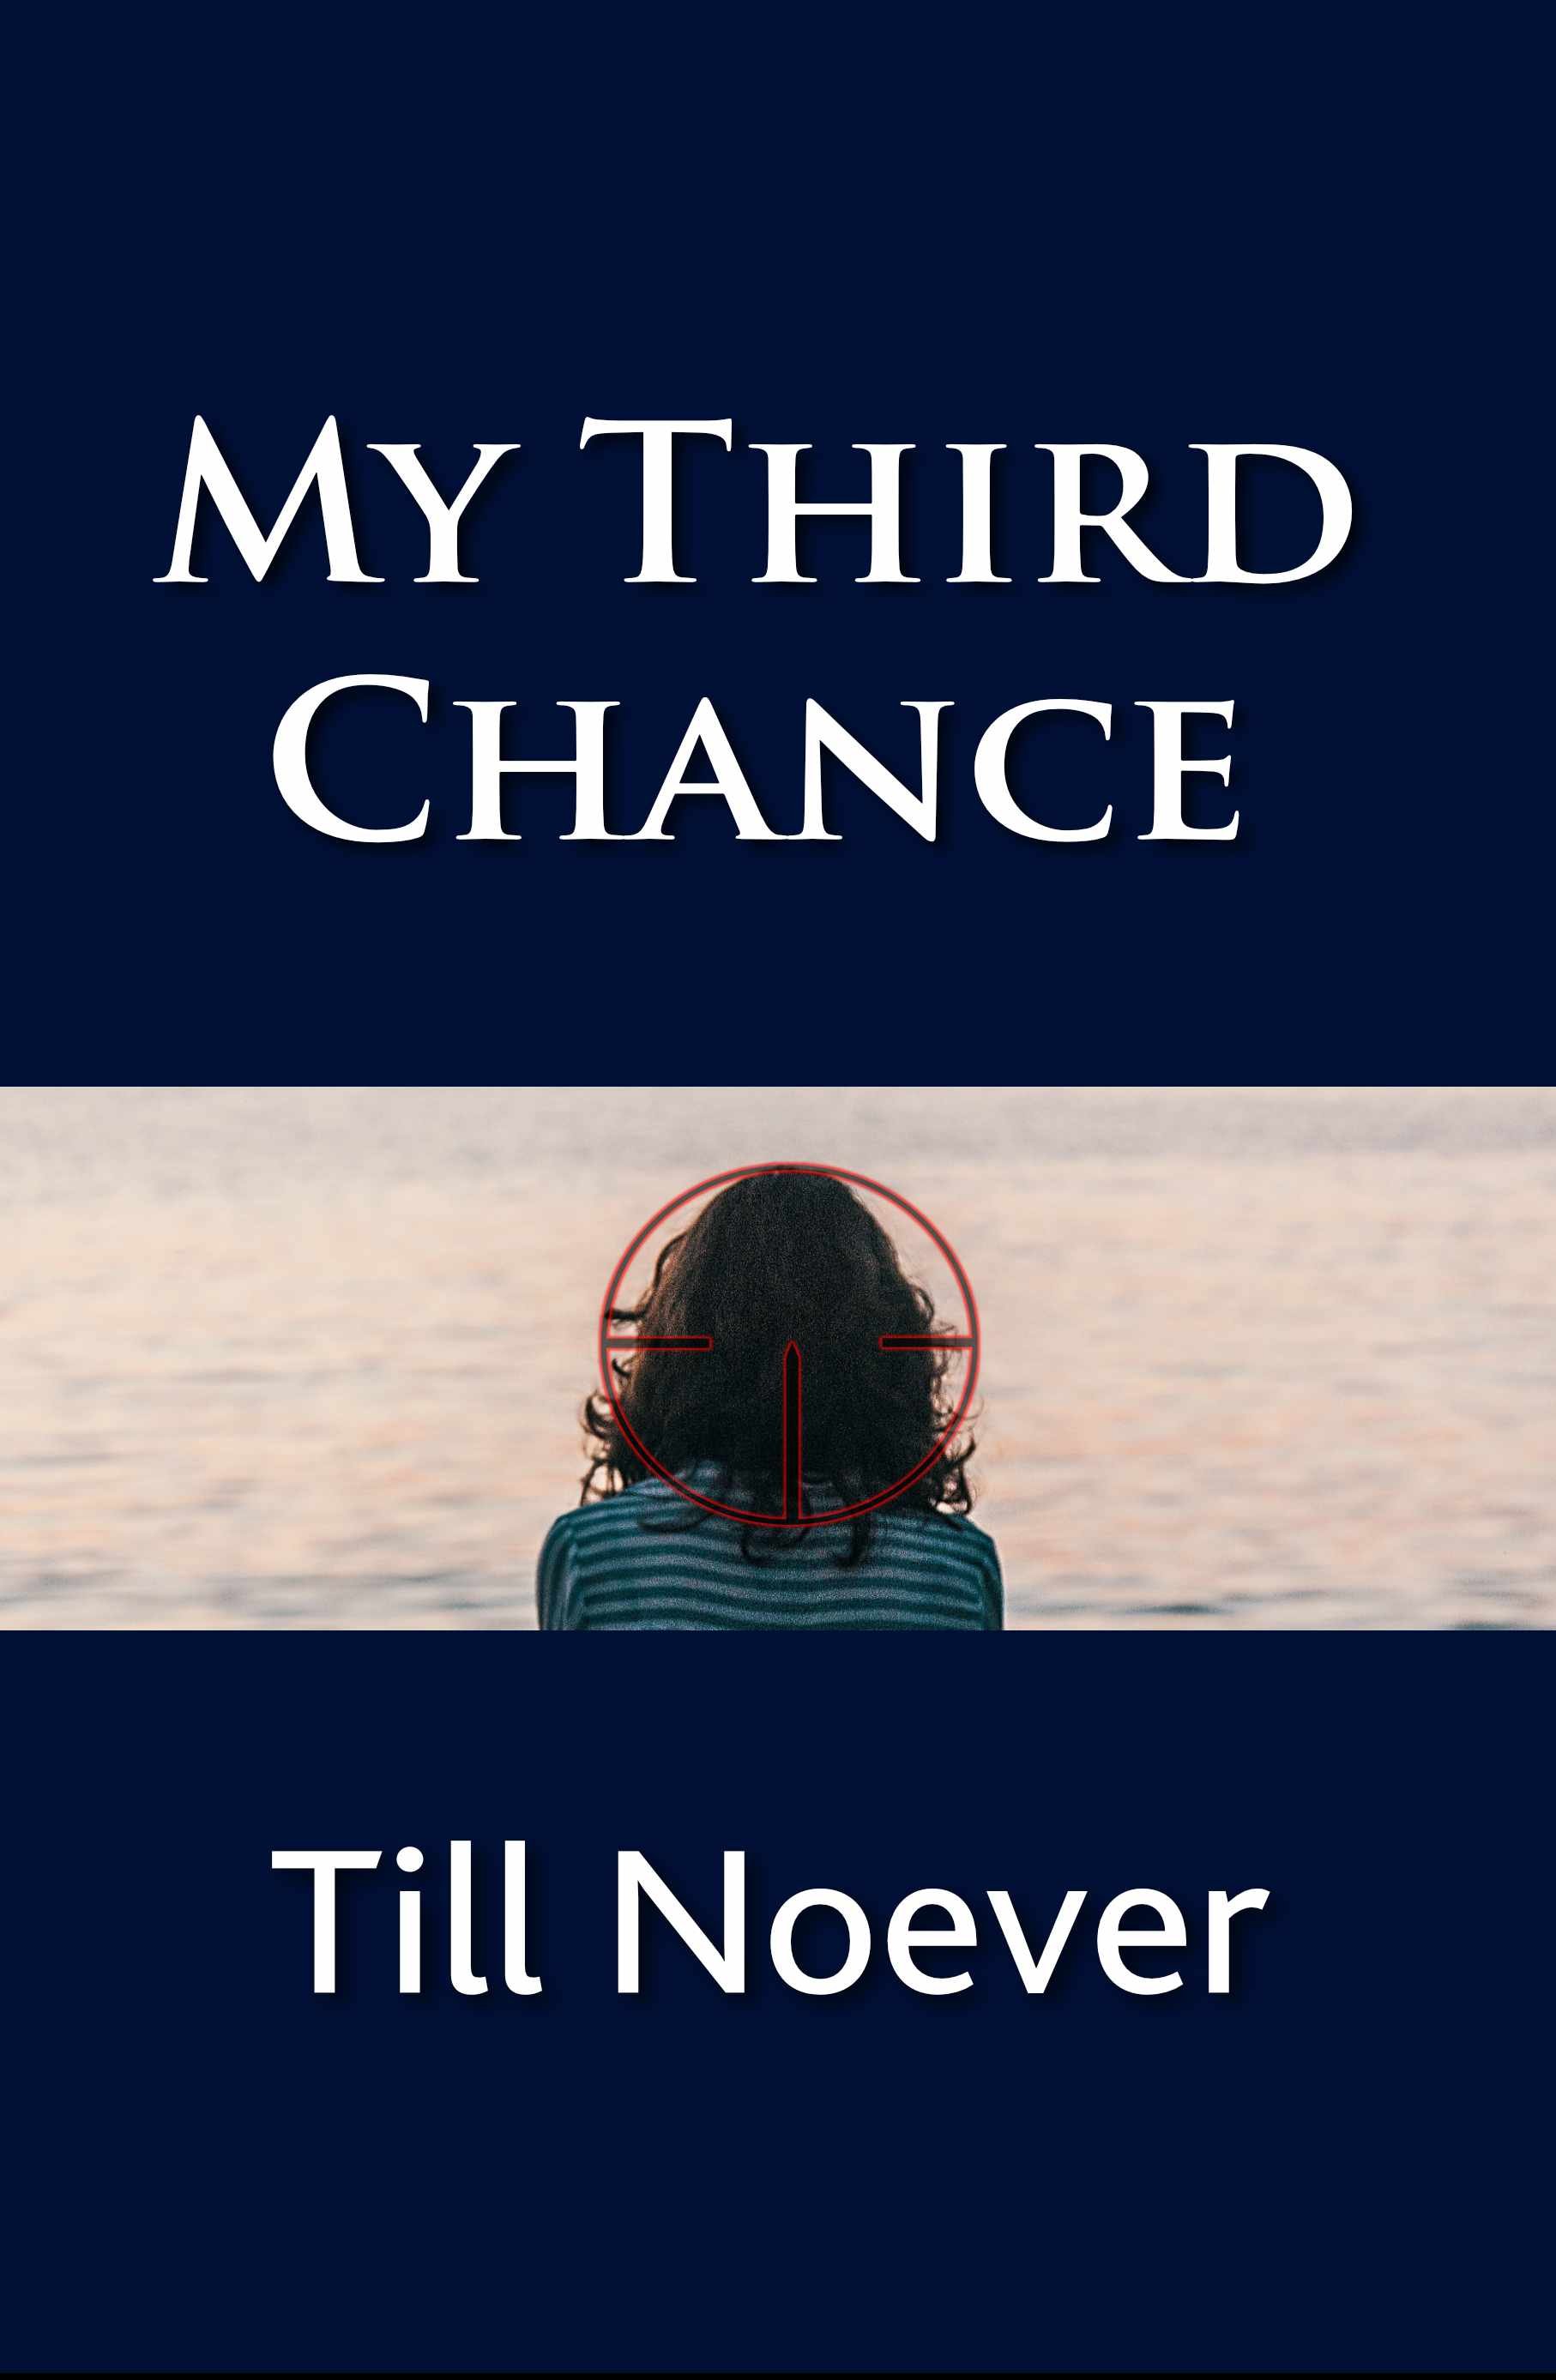 My Third Chance Cover-AMAZONKINDLE.jpg